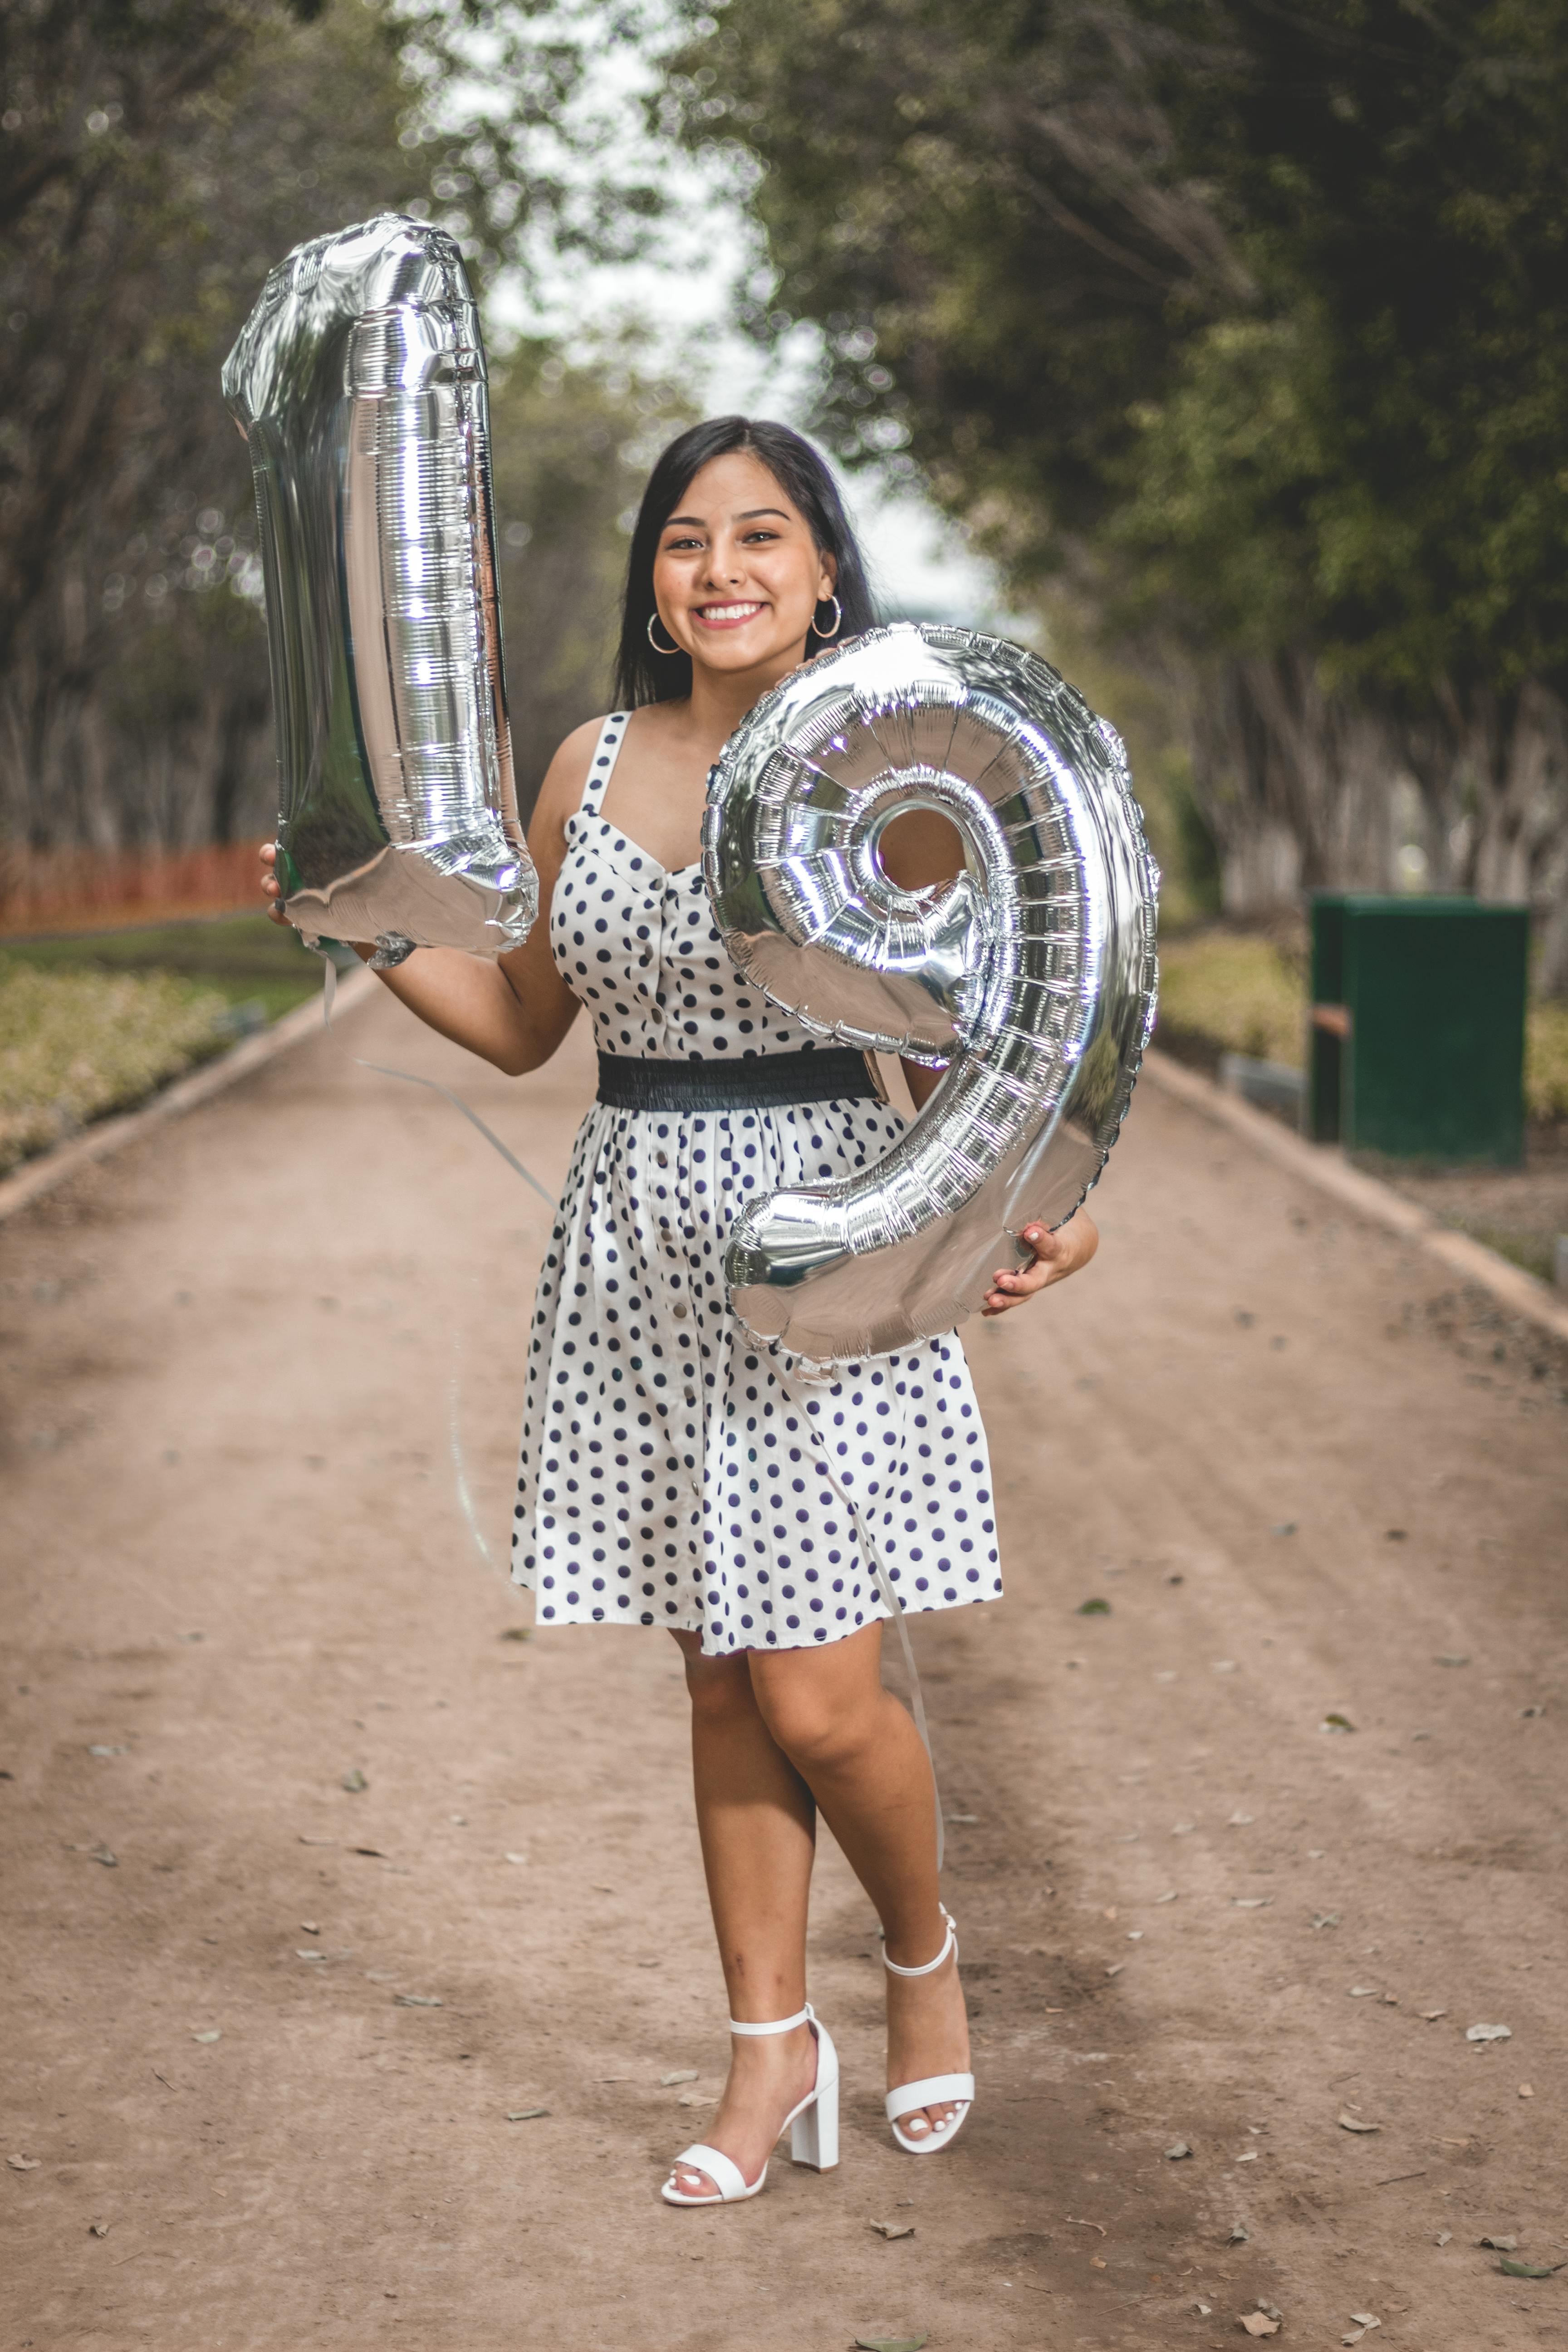 67 Best 30th Birthday Photoshoot Ideas For Her: Tips, Poses, Outfits, And  More | 30th birthday themes, 30th birthday, Birthday photoshoot